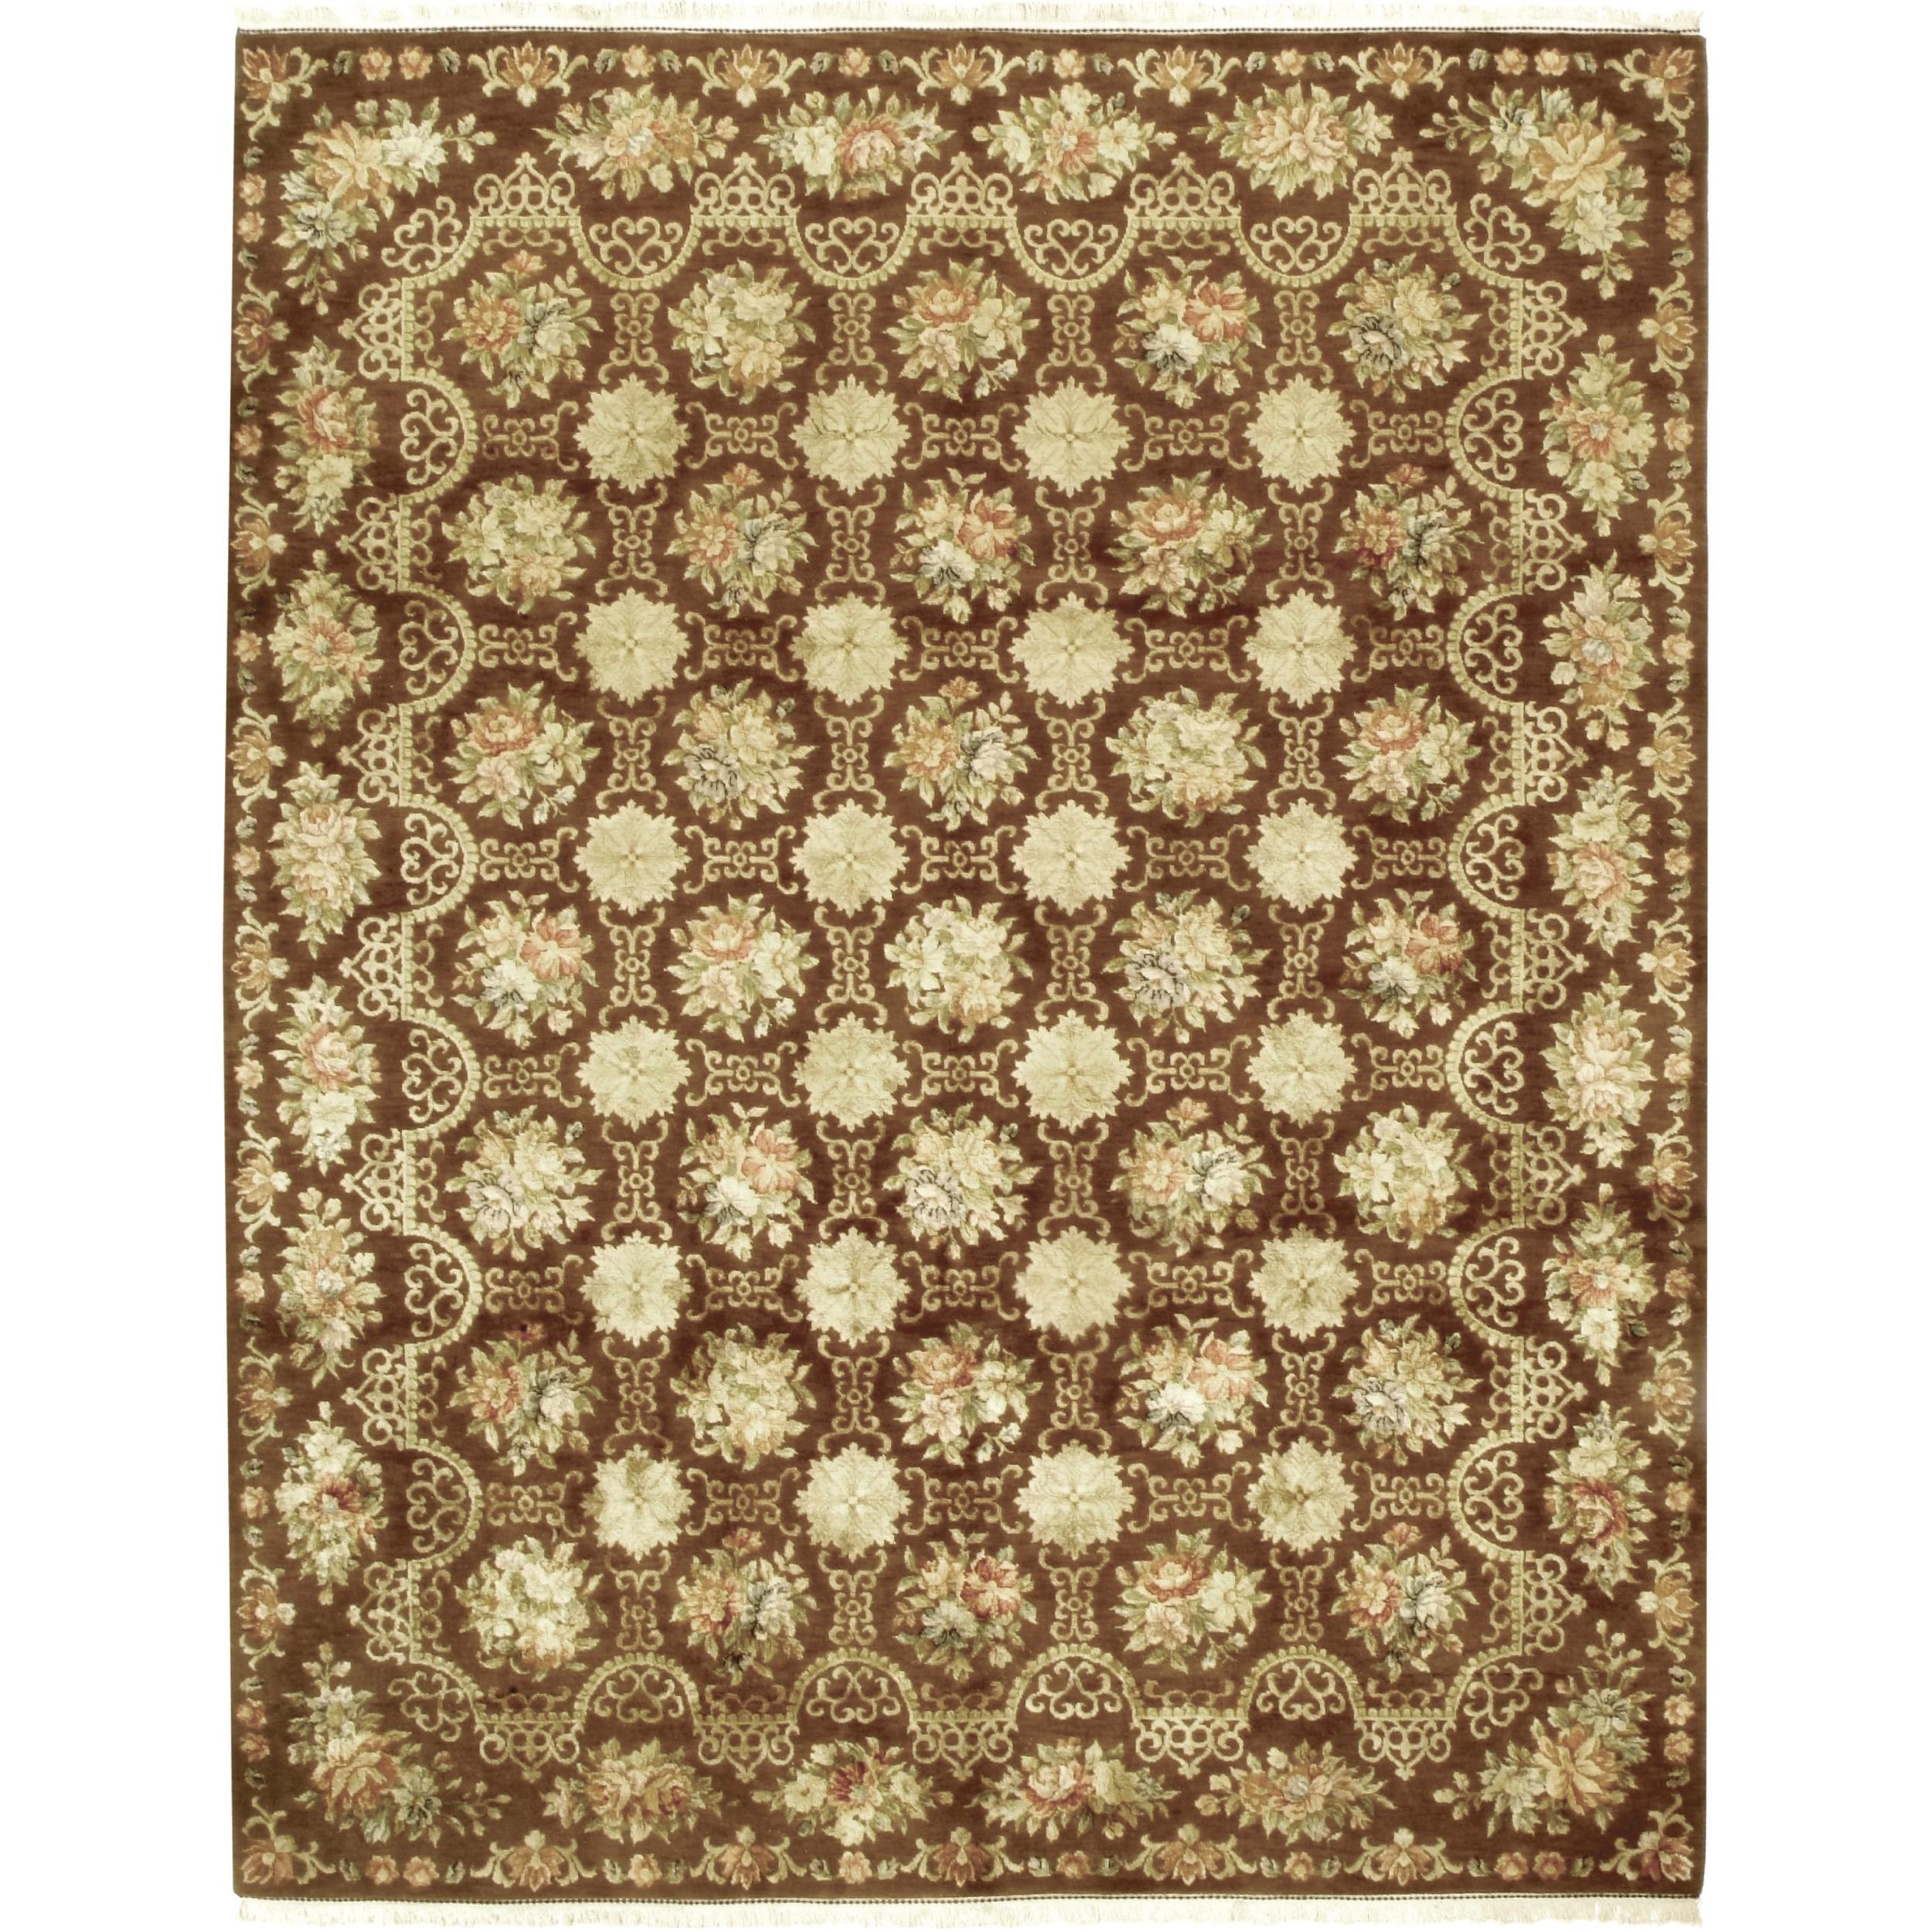 Luxury European Hand-Knotted Cambridge Brown 10x14 Rug In New Condition For Sale In Secaucus, NJ